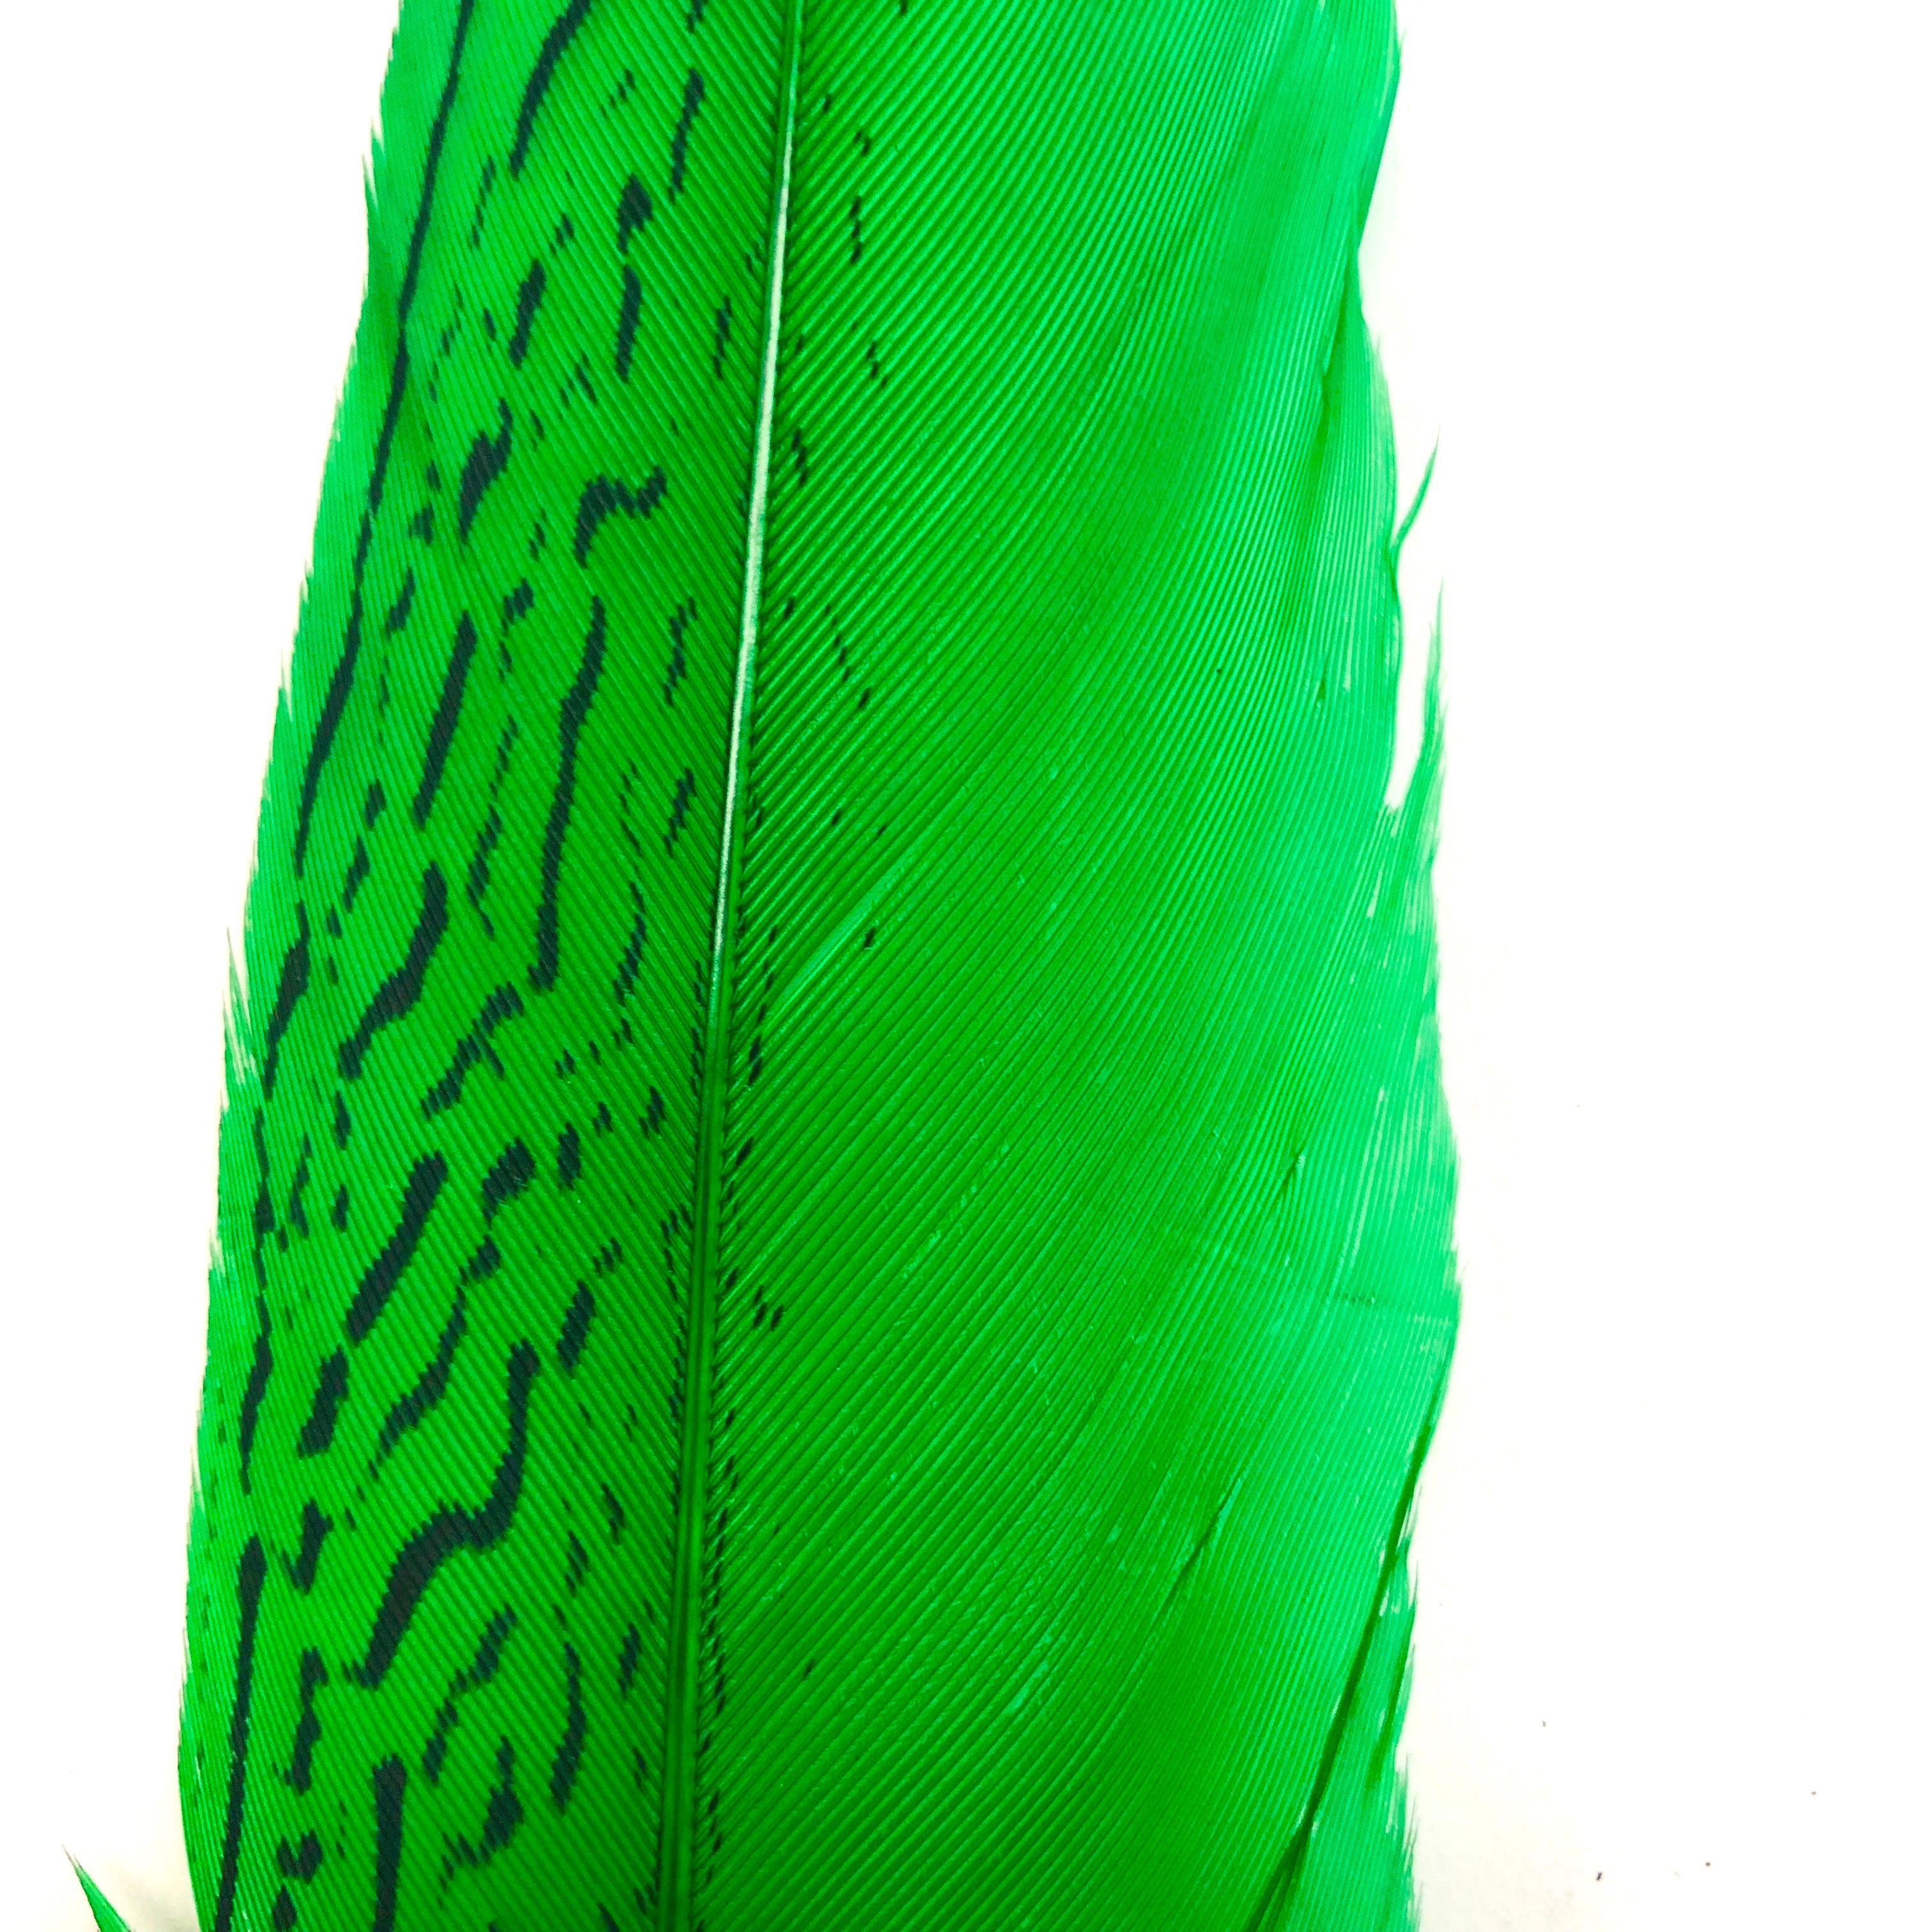 6" to 10" Silver Pheasant Tail Feather - Green ((SECONDS))